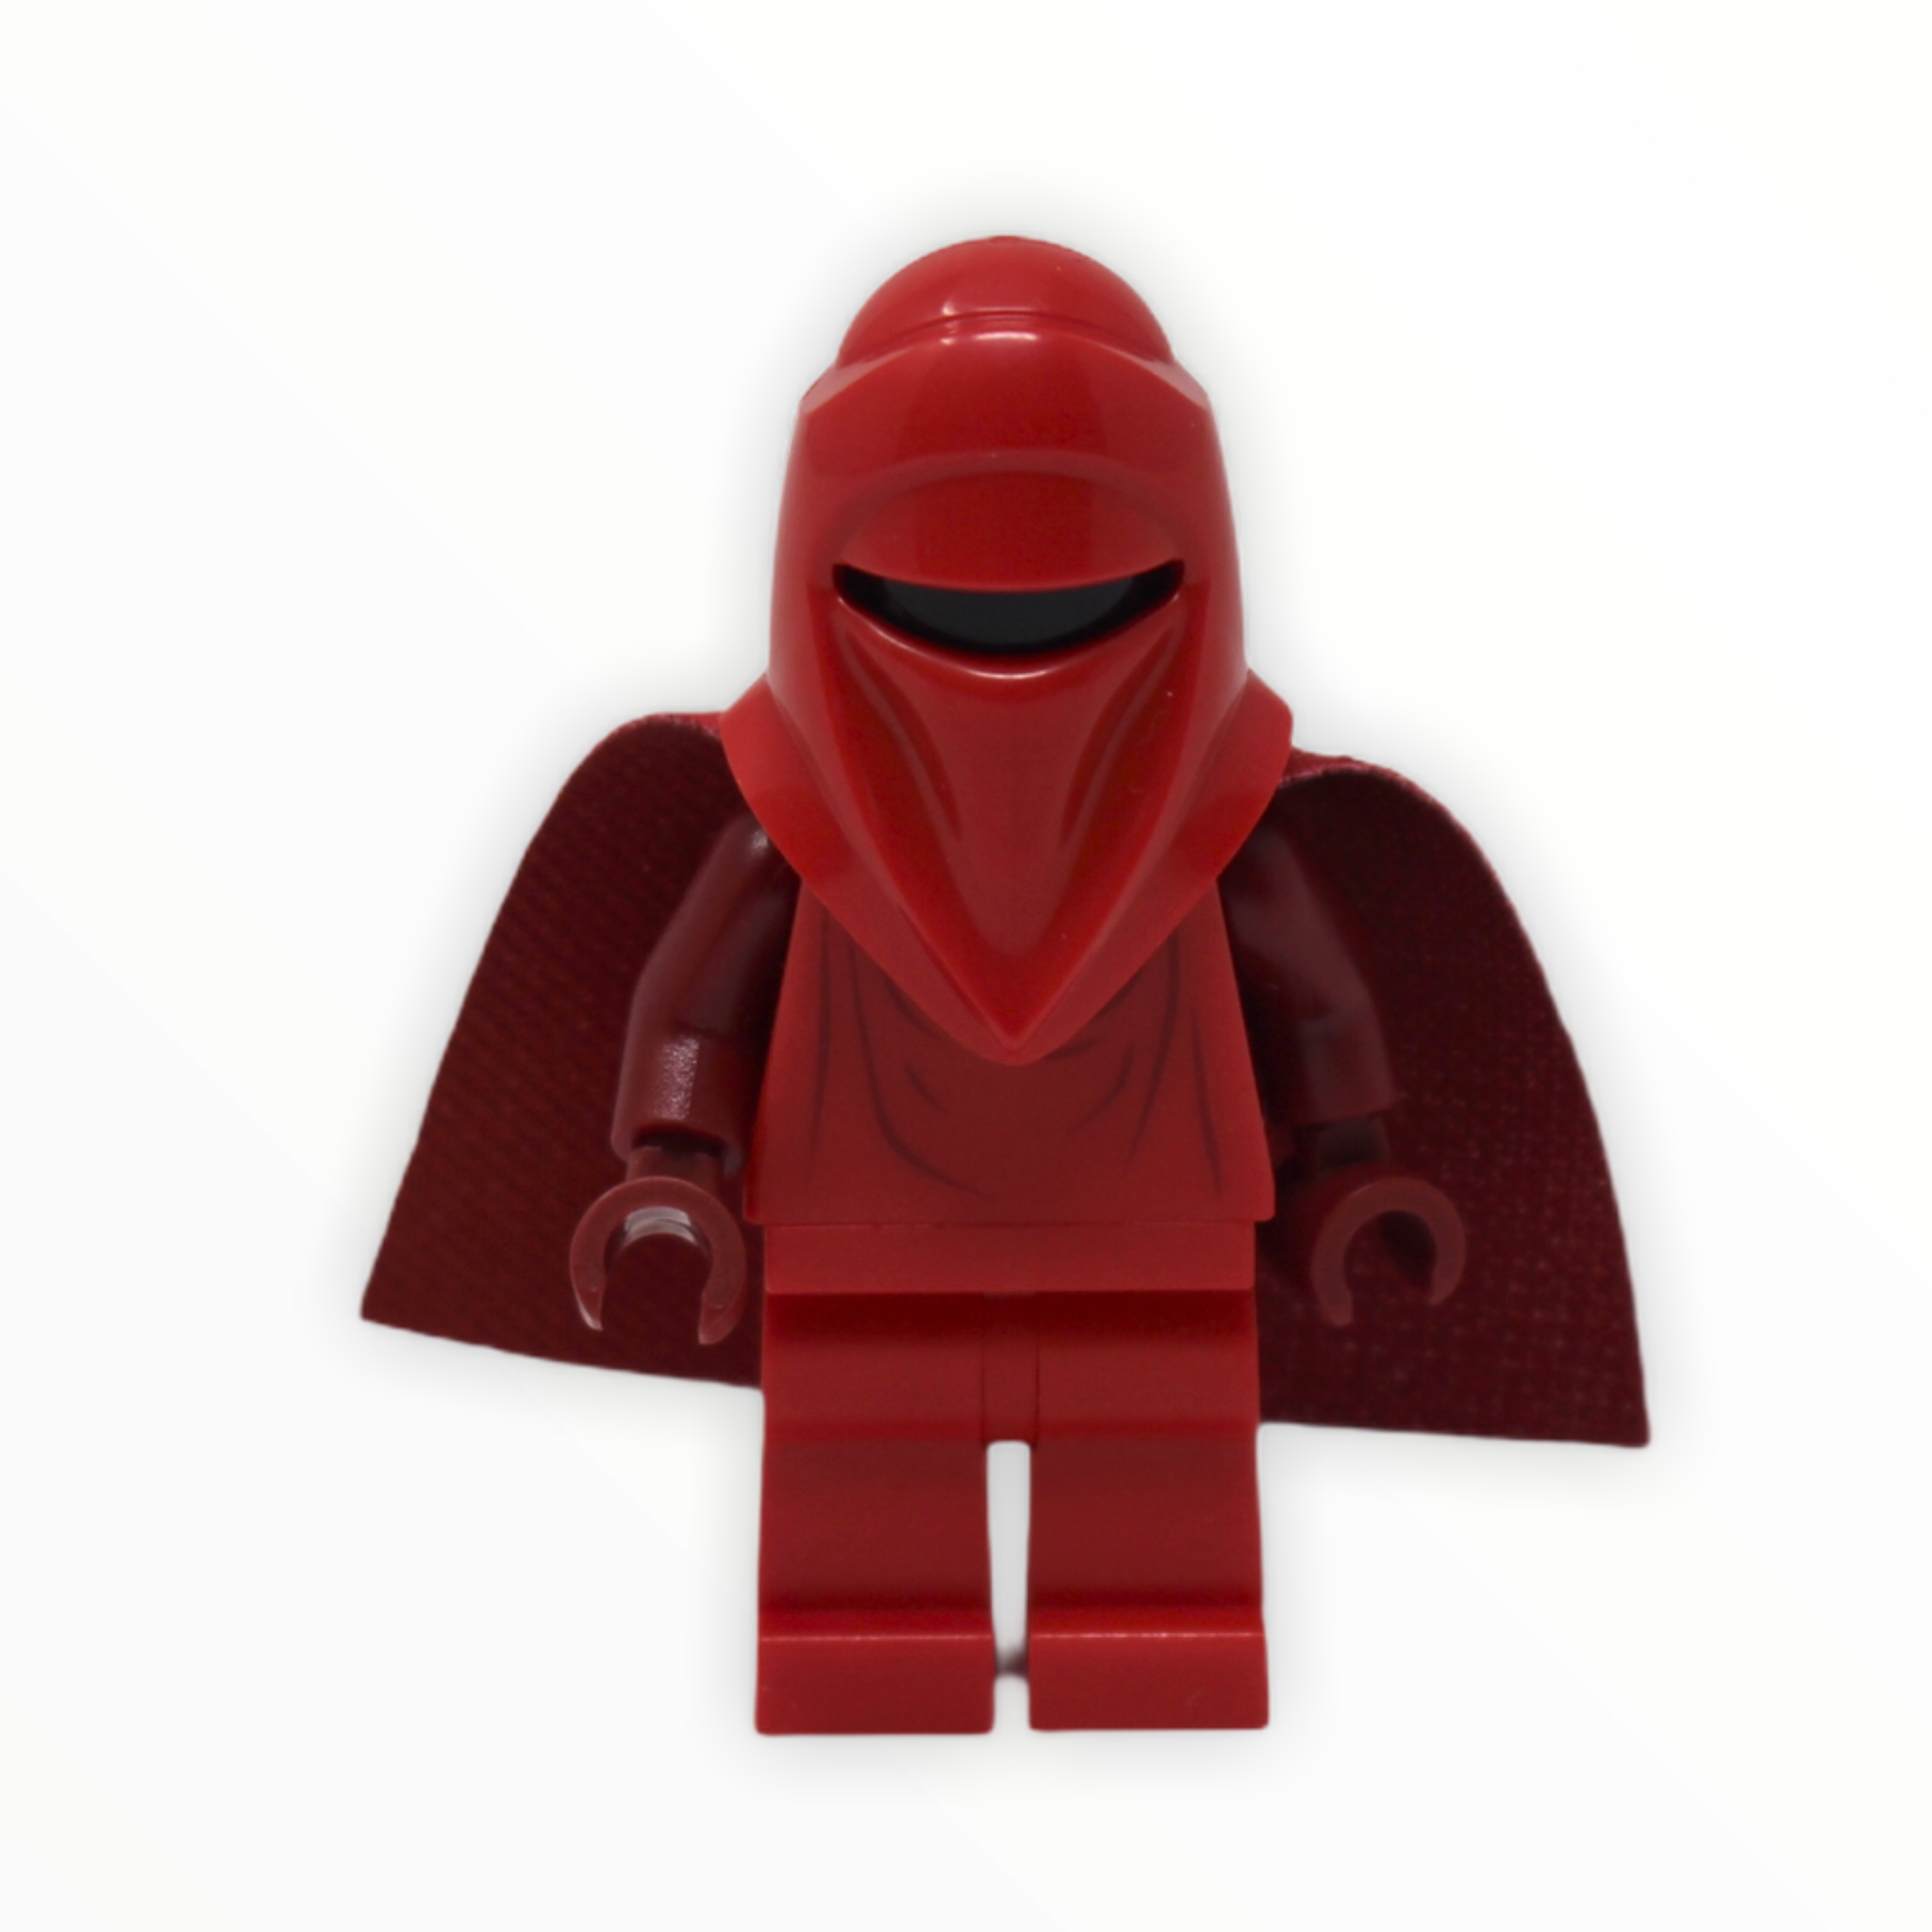 Royal Guard (spongy two-tone cape, dark red arms)